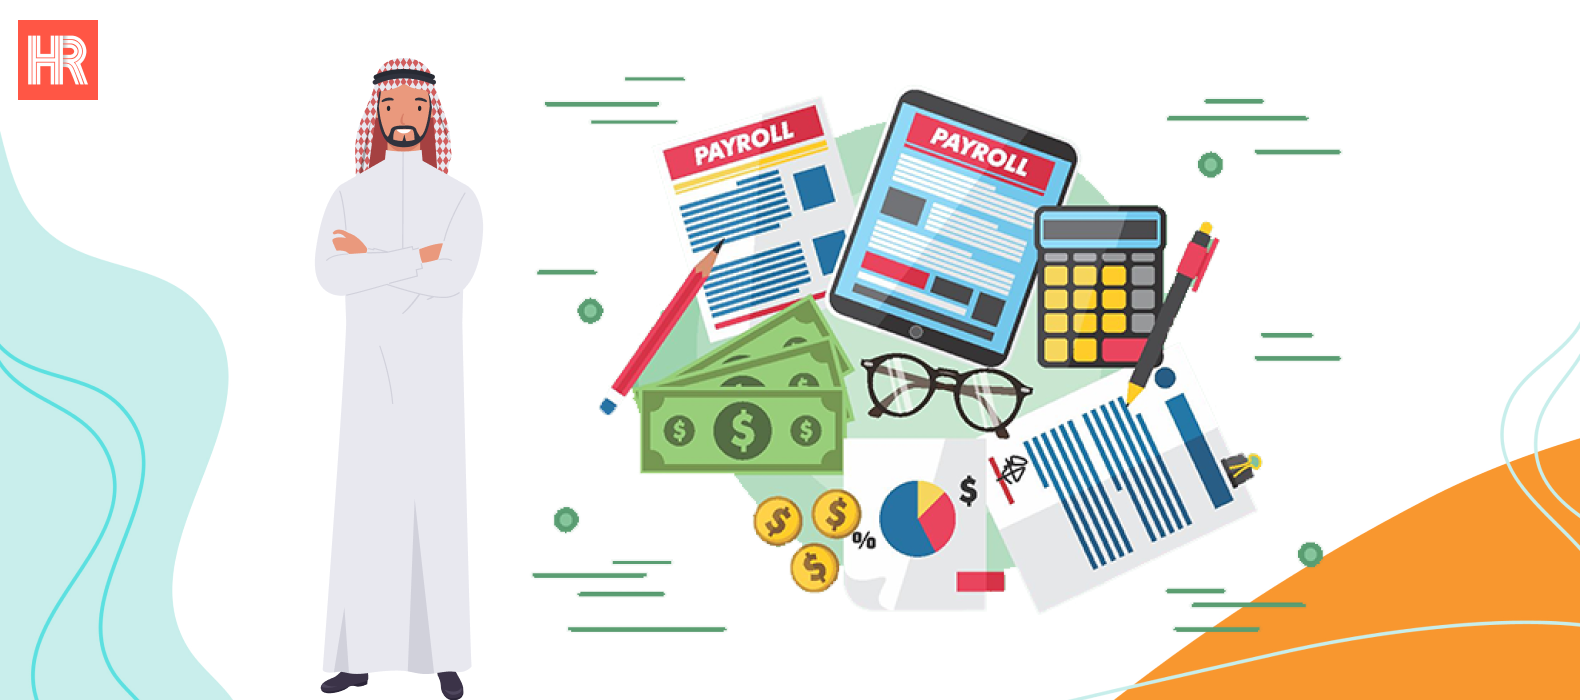 What is Manual payroll system?